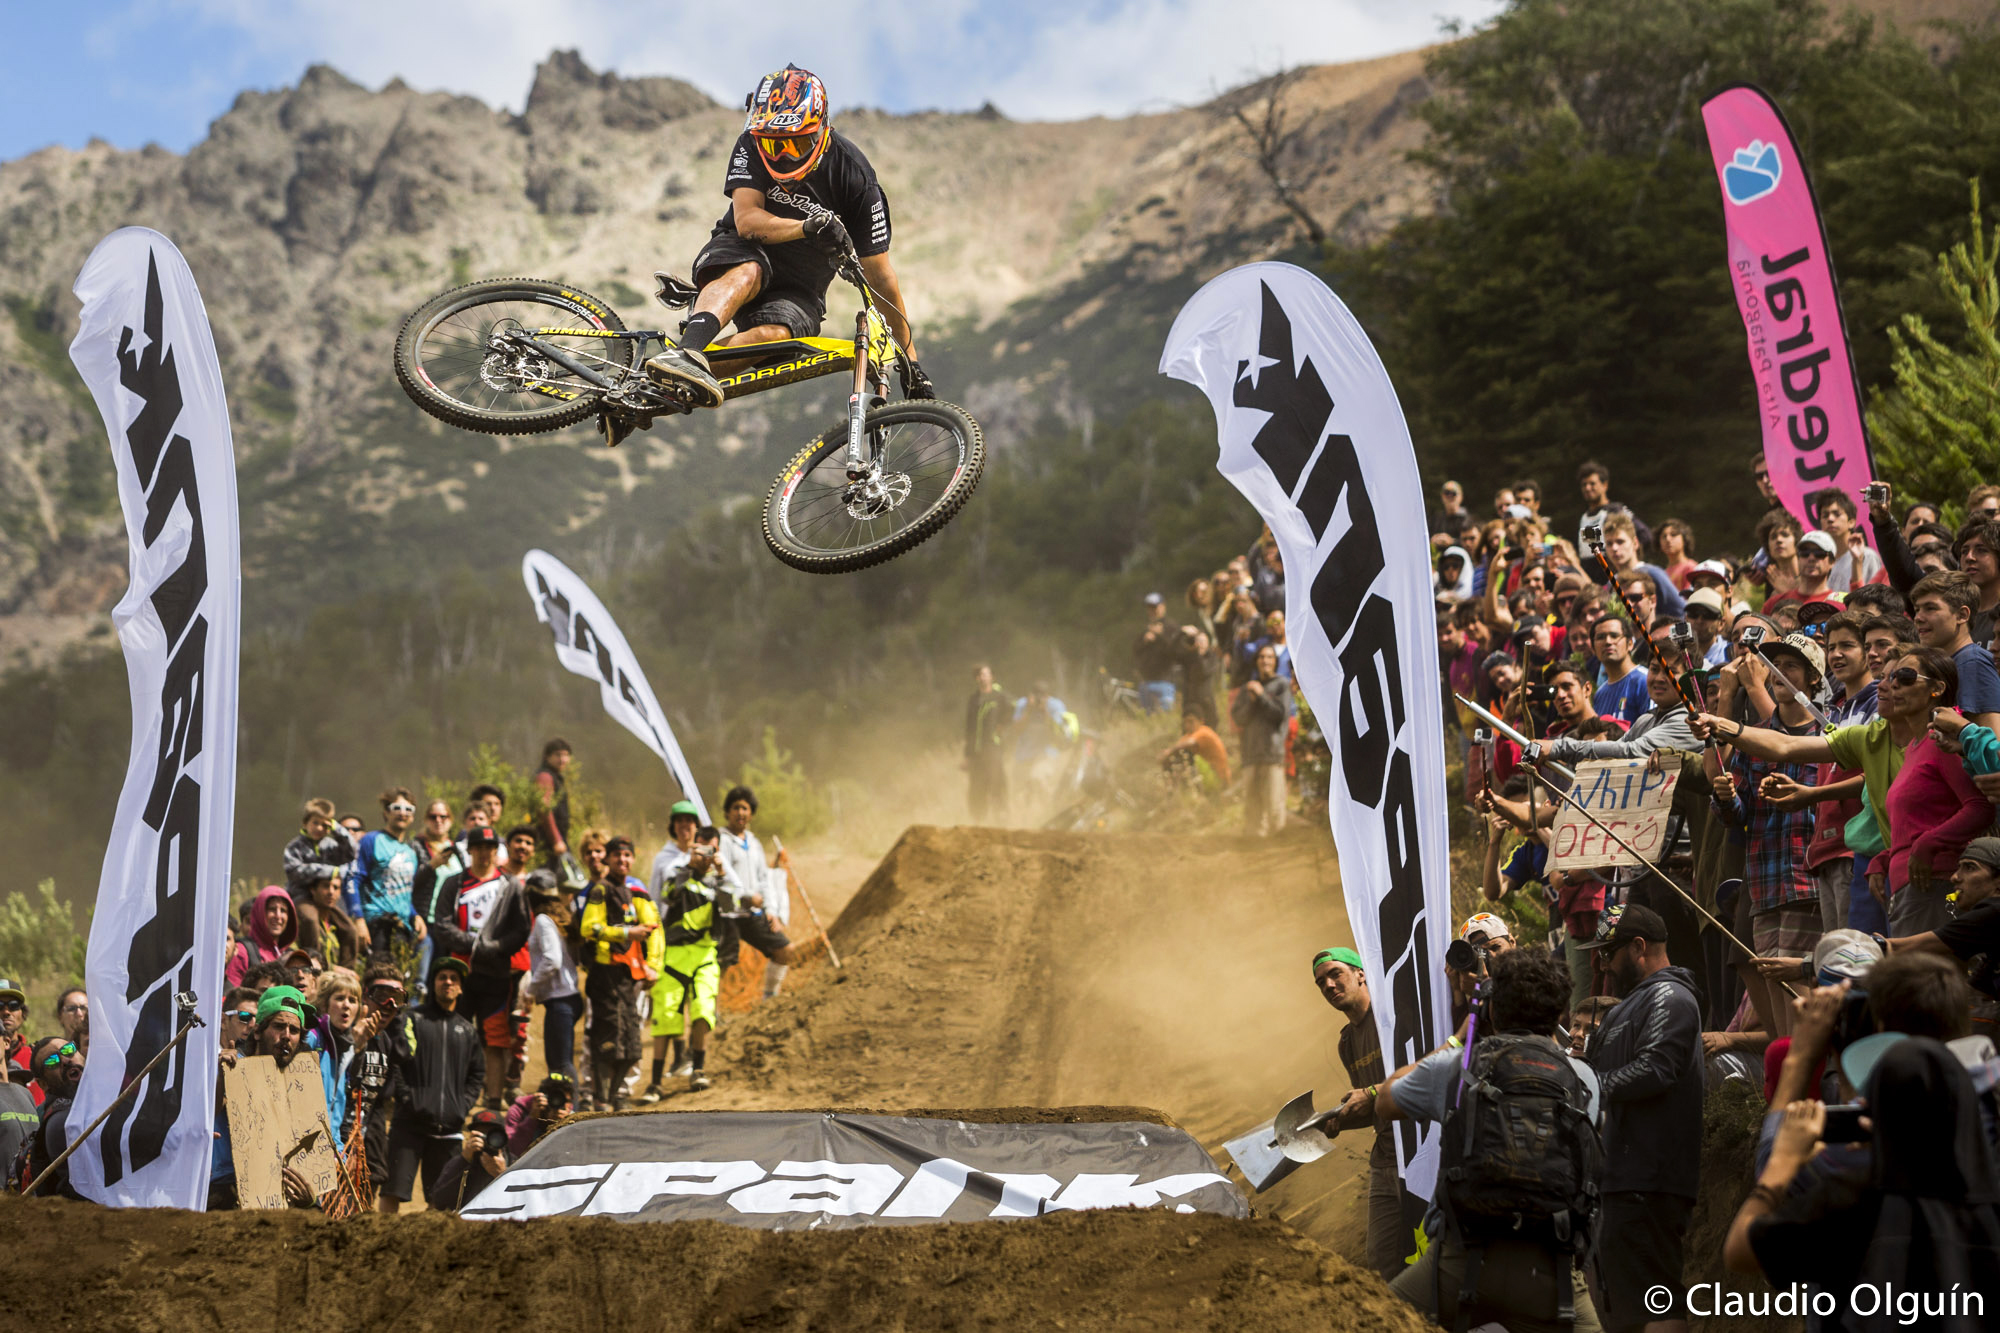 Mario Jarrin’s sick style earned him the top spot on the podium